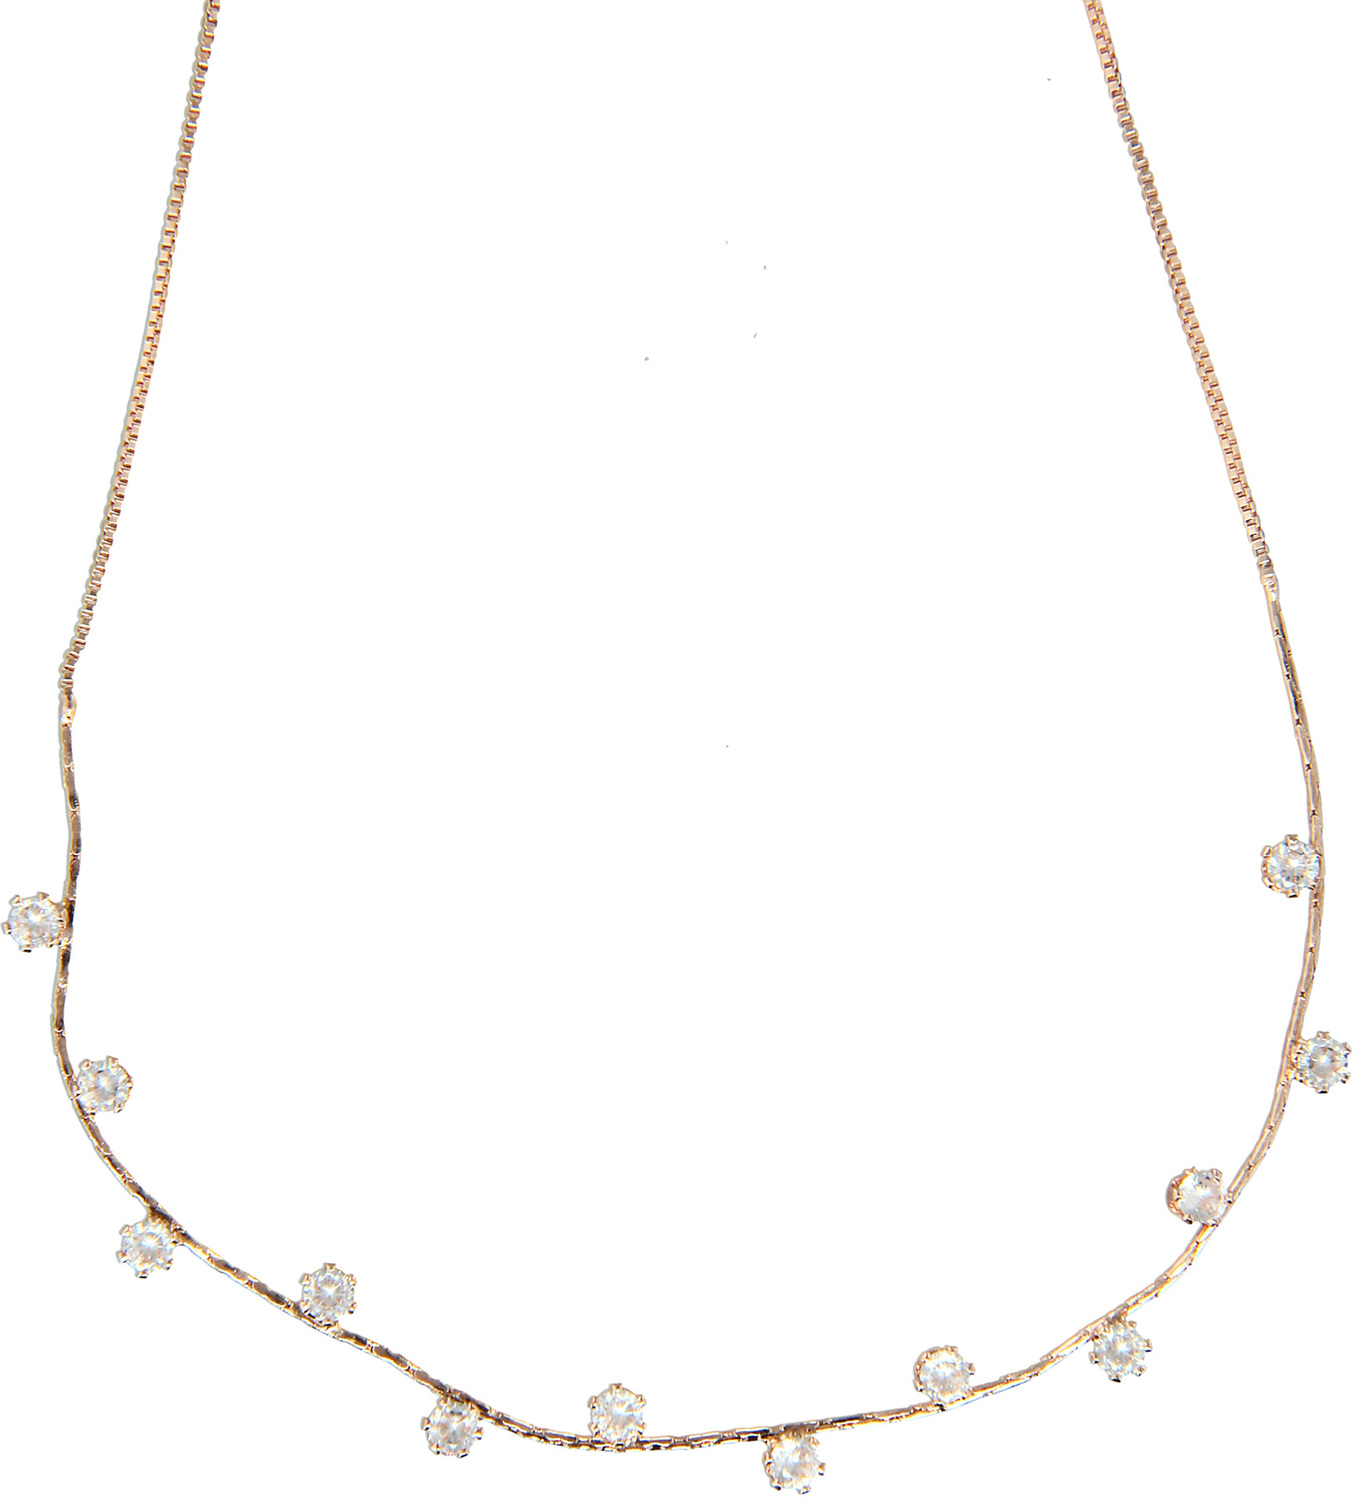 Stunning Crystal in Rose Gold by H2Z - Jewelry - Stunning Crystal in Rose Gold - 16.5-18.5" Cubic Zirconia Necklace